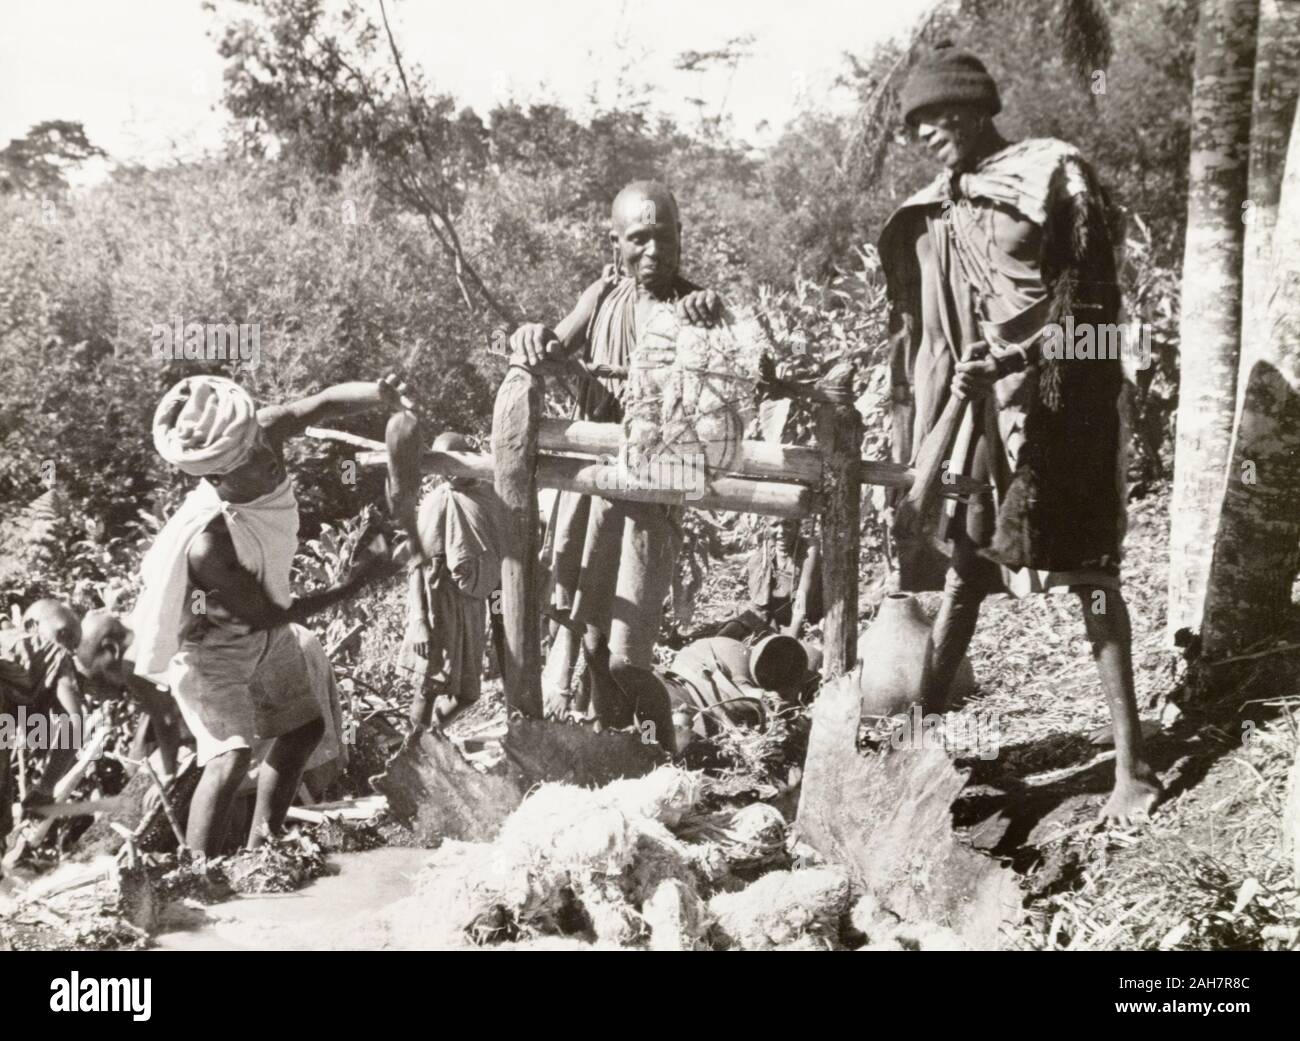 Kenya, Three Kikuyu men making beer from sugar cane using the traditional method.Original manuscript caption: Presing juice from sugar cane to make beer. S. Nyeri 1936. The juice is collected on an ox hide & poured into gourds to ferment. The resultant brew is stronger than beer made from millet, 1937. 1995/076/1/2/5/21. Stock Photo